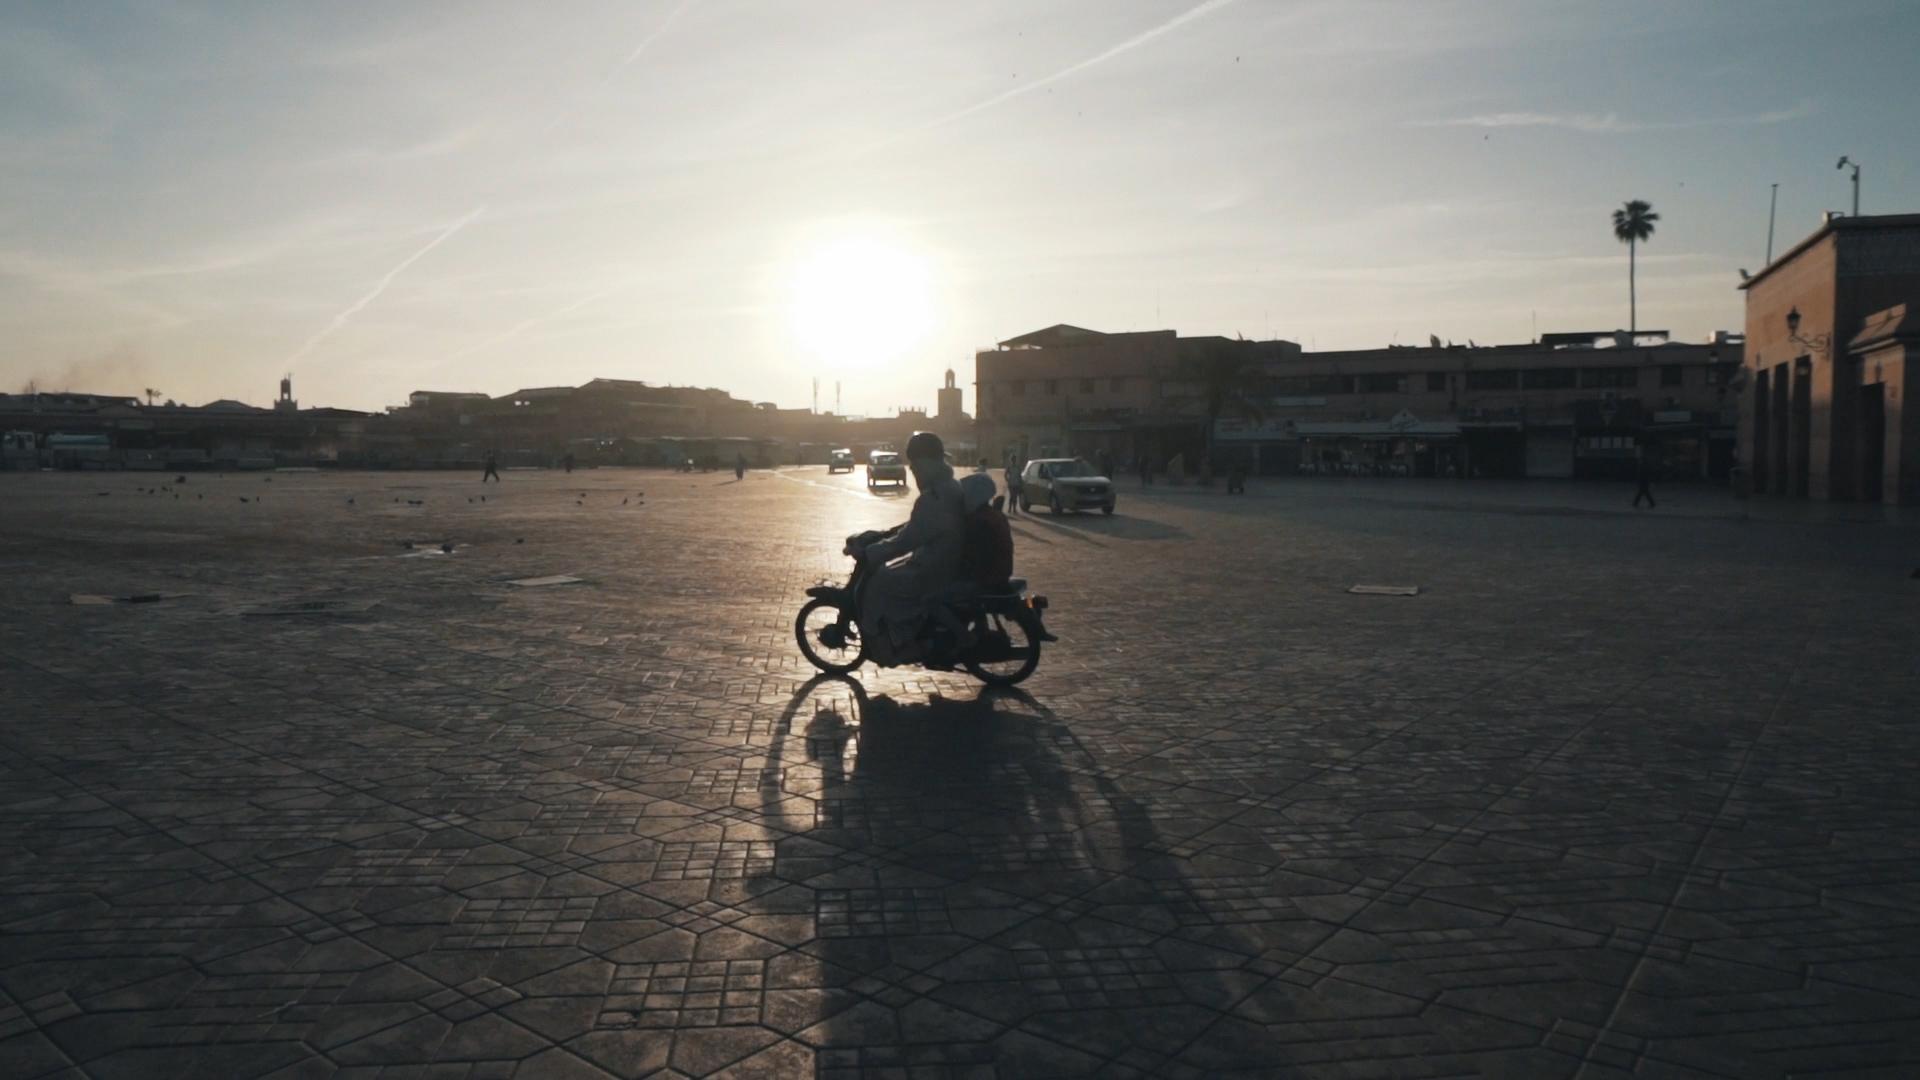 Motorcycle in the early morning on Djemaa el Fna